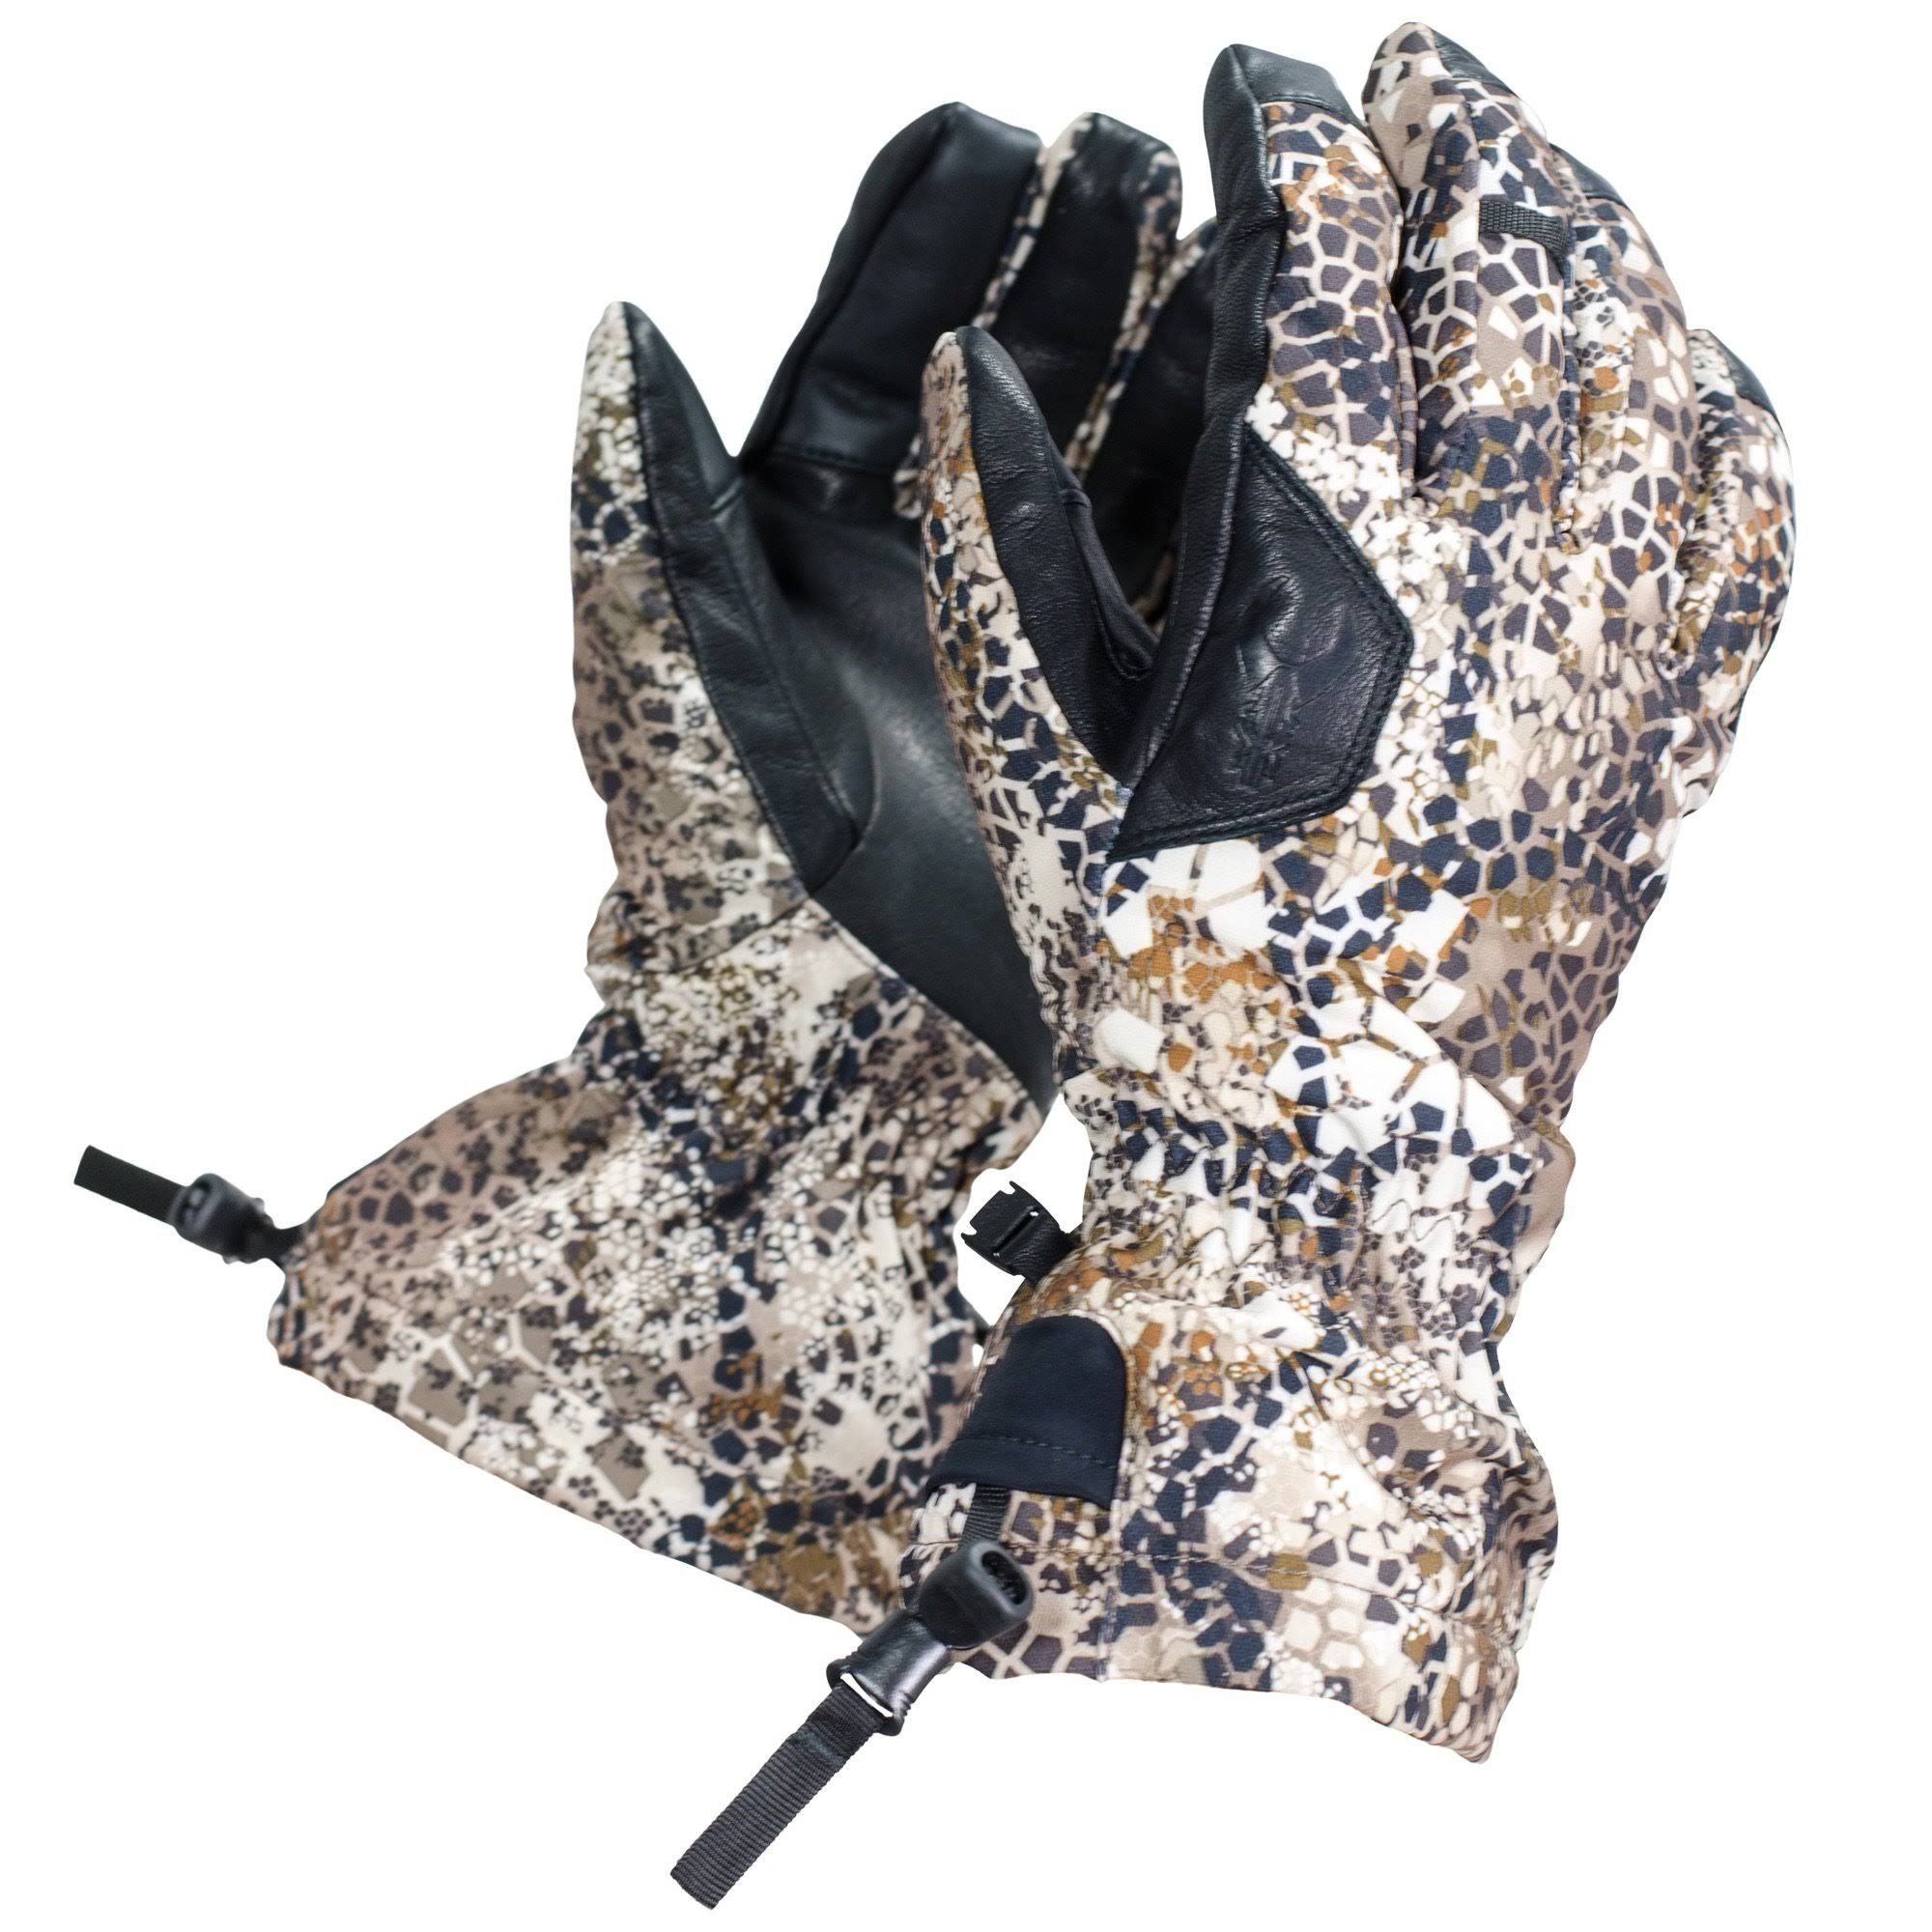 Badlands Convection Glove (Approach FX, Large)